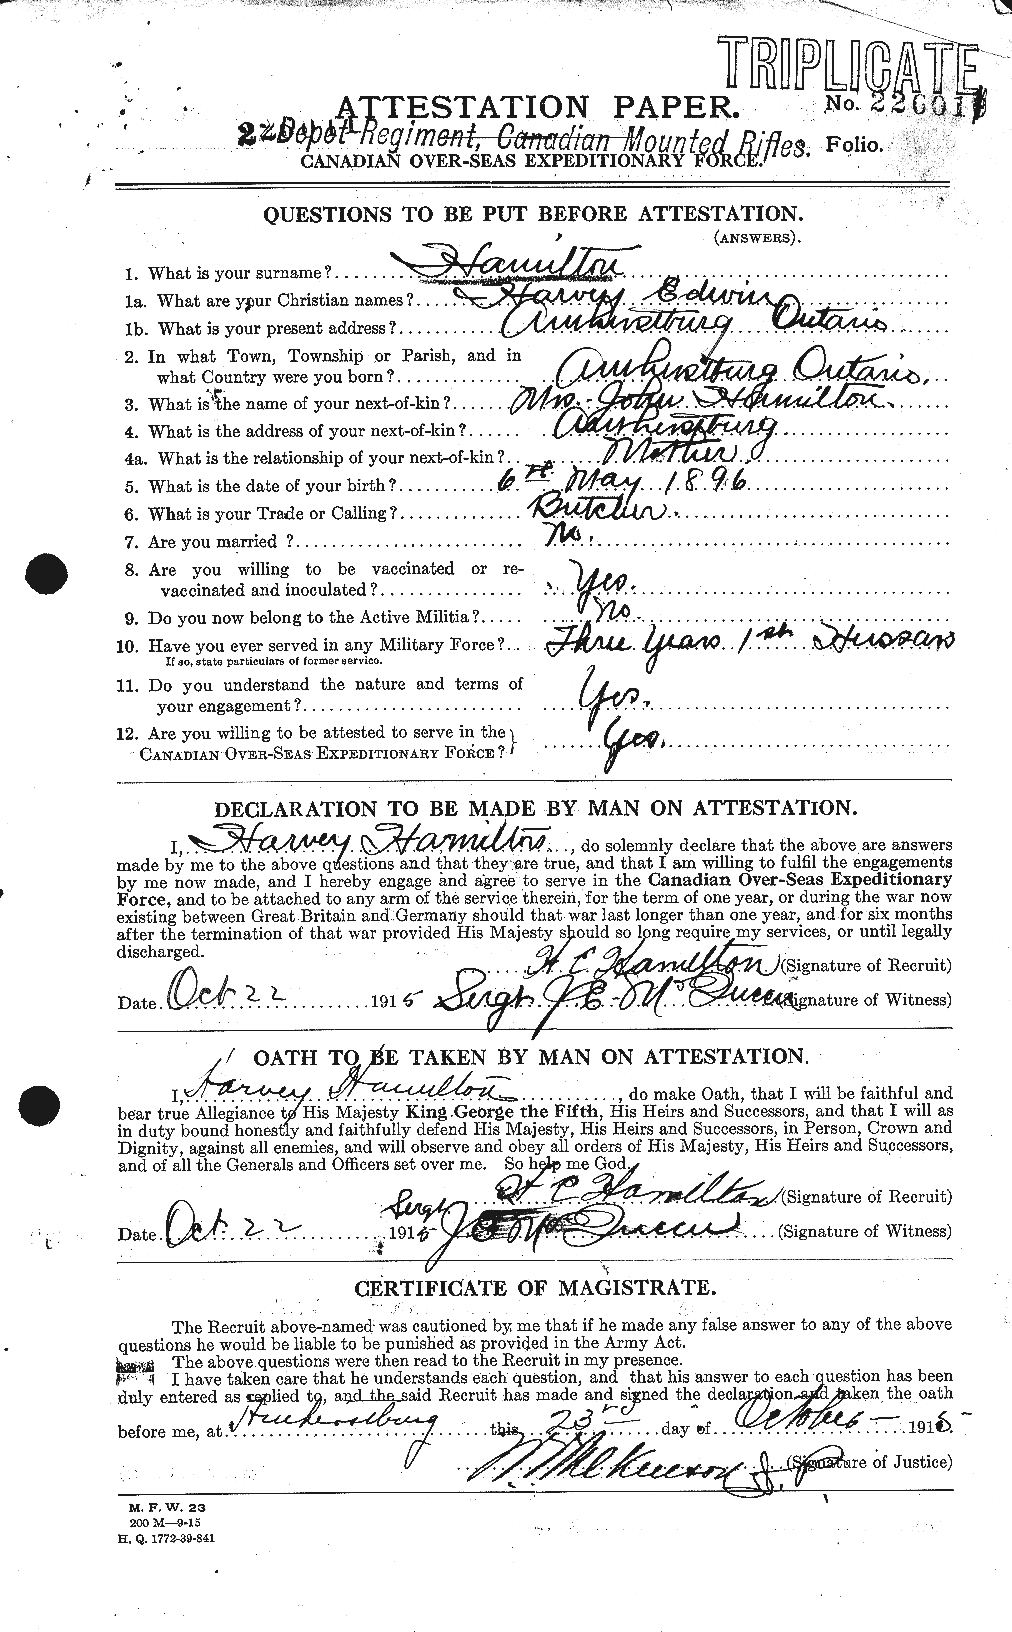 Personnel Records of the First World War - CEF 372518a